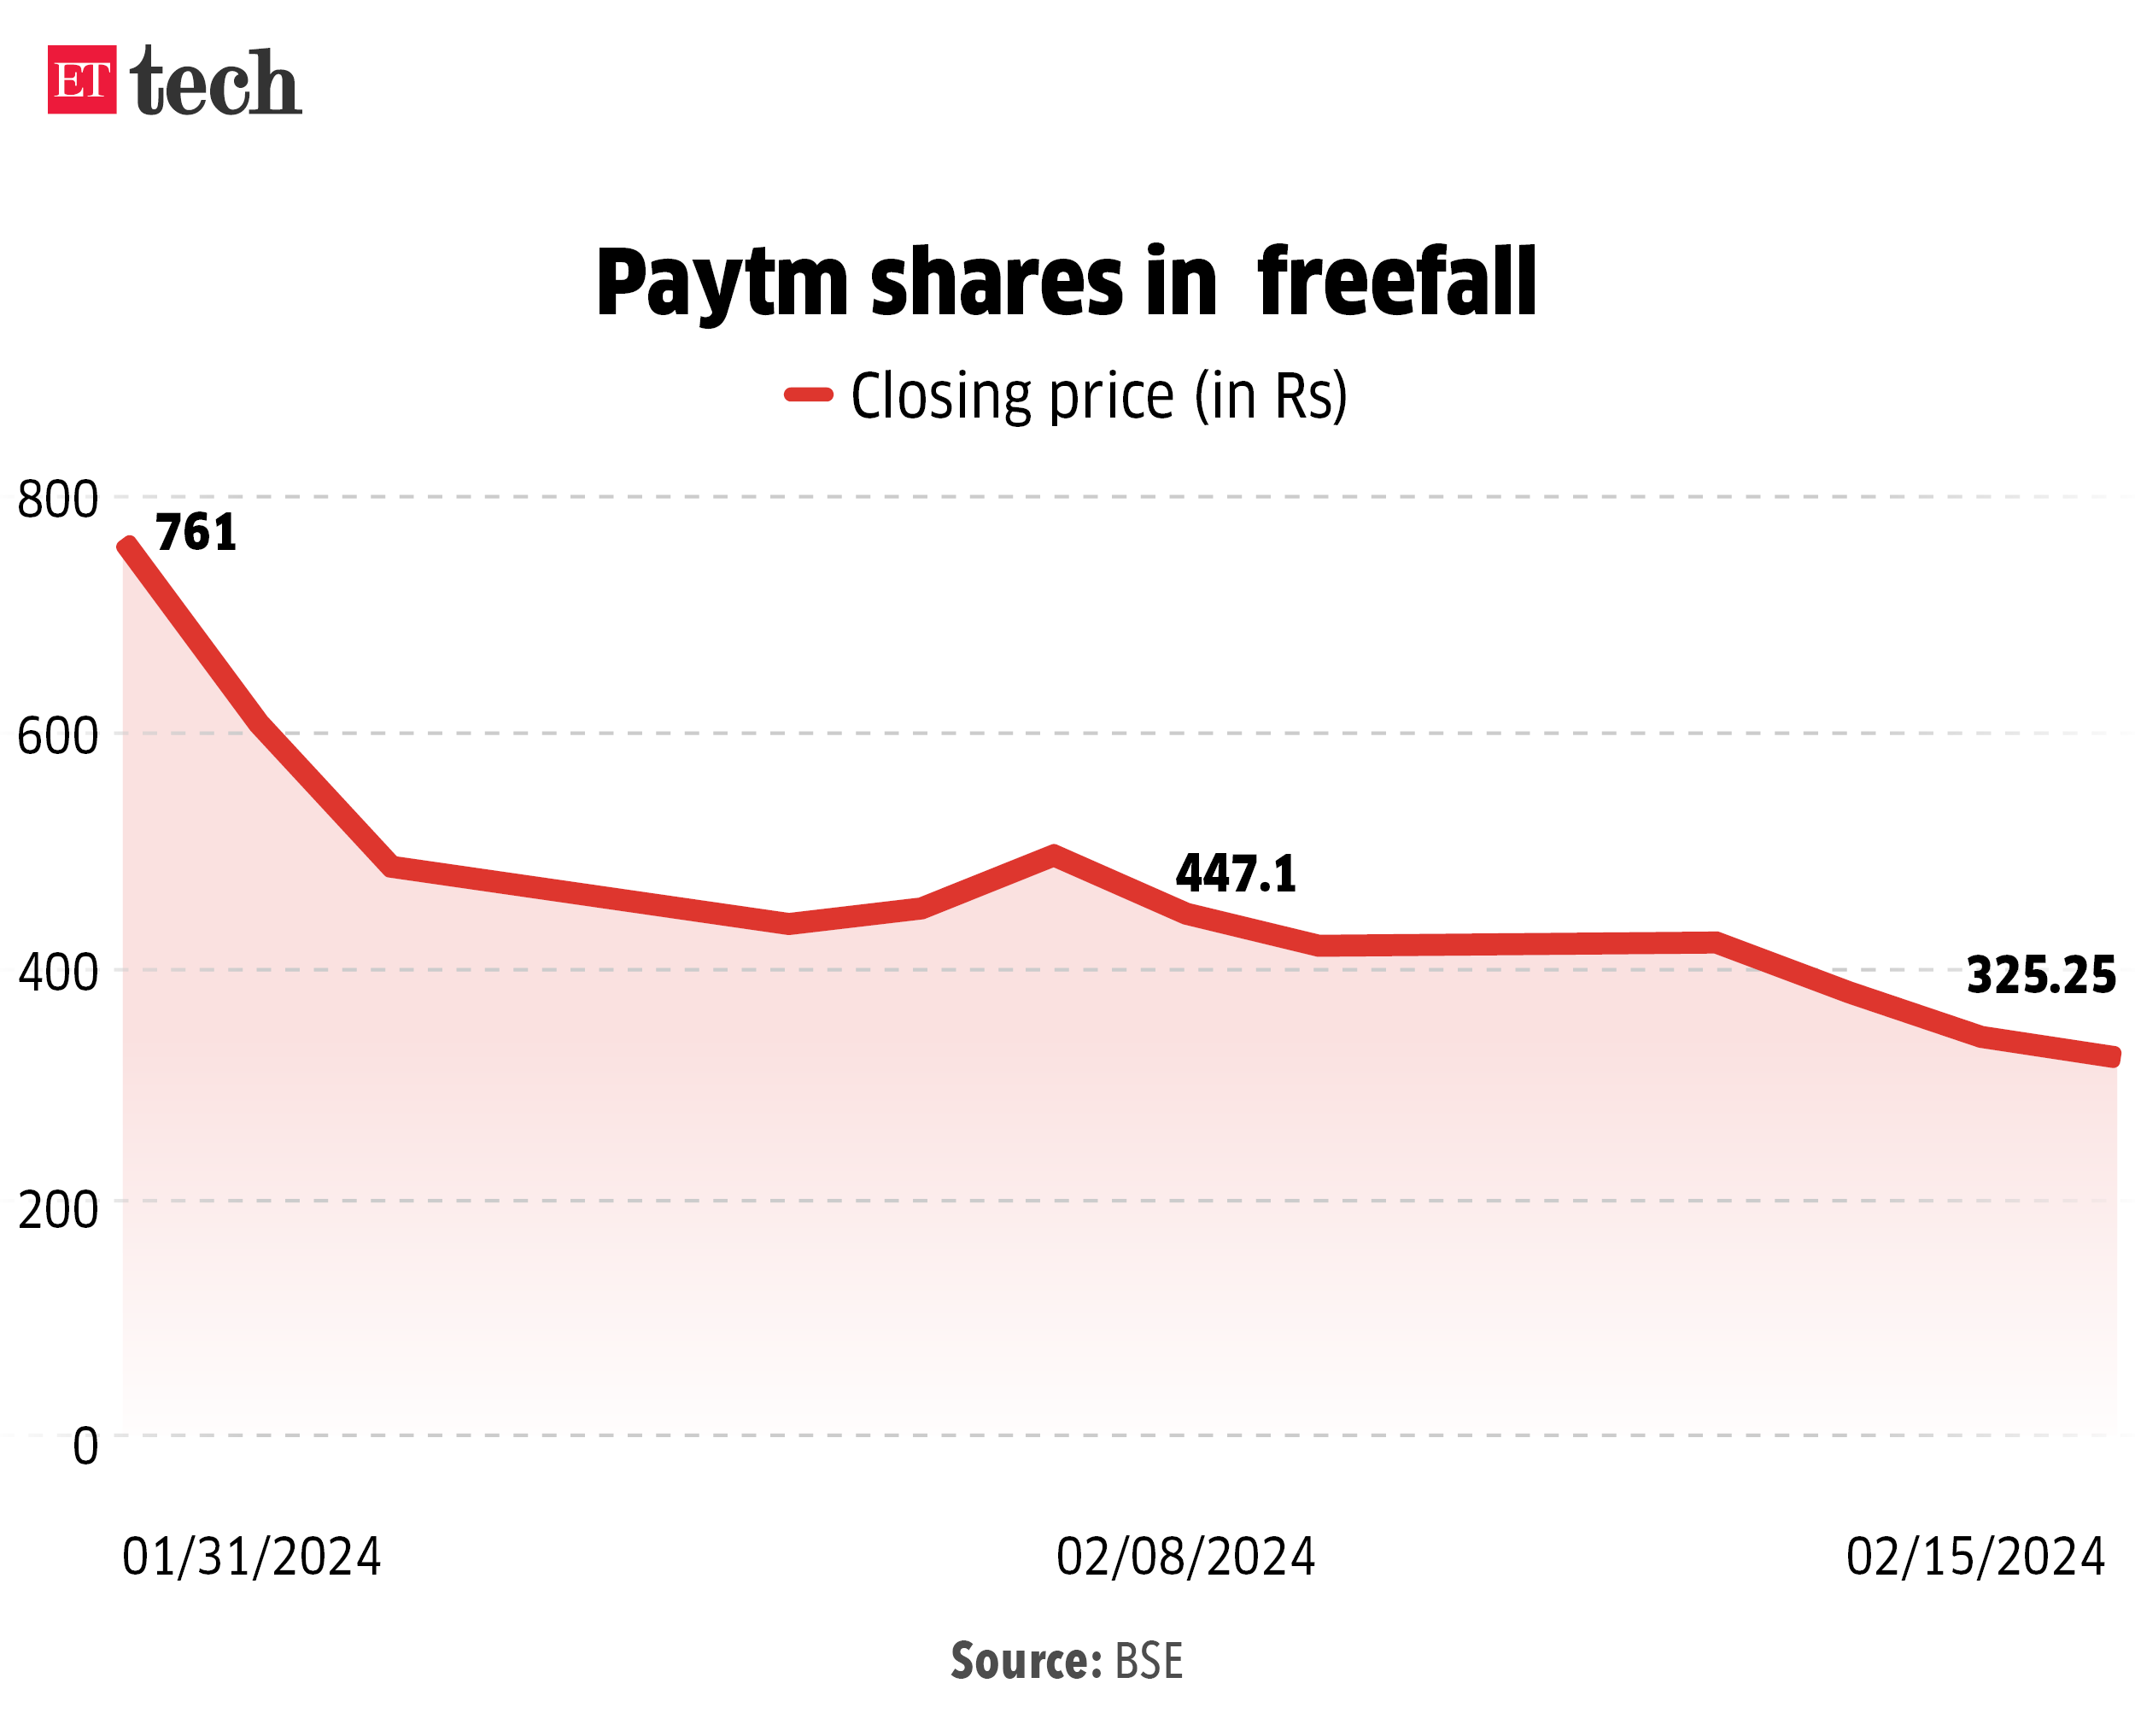 Paytm shares in freefall